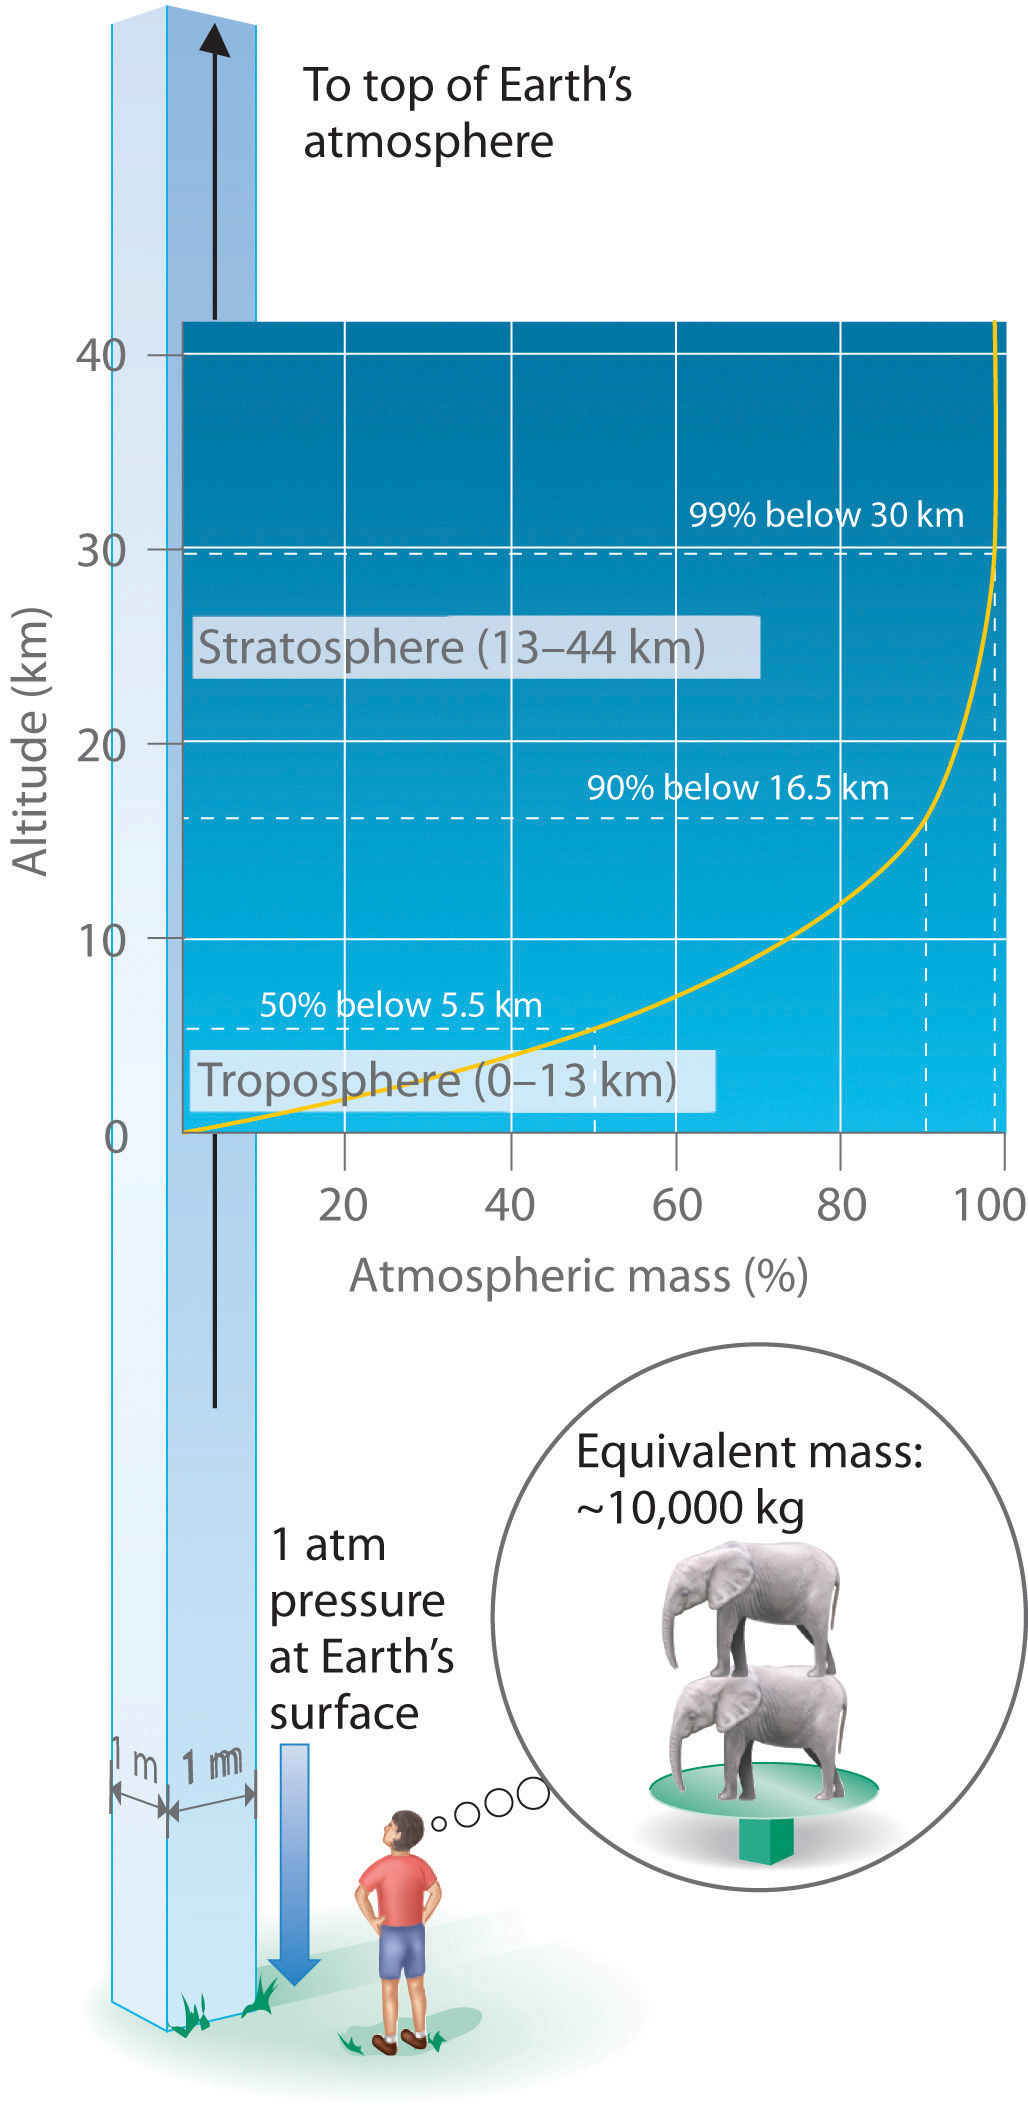 1 atm pressure at Earth's surface equals the equivalent mass of  10,000 kg or two elephants